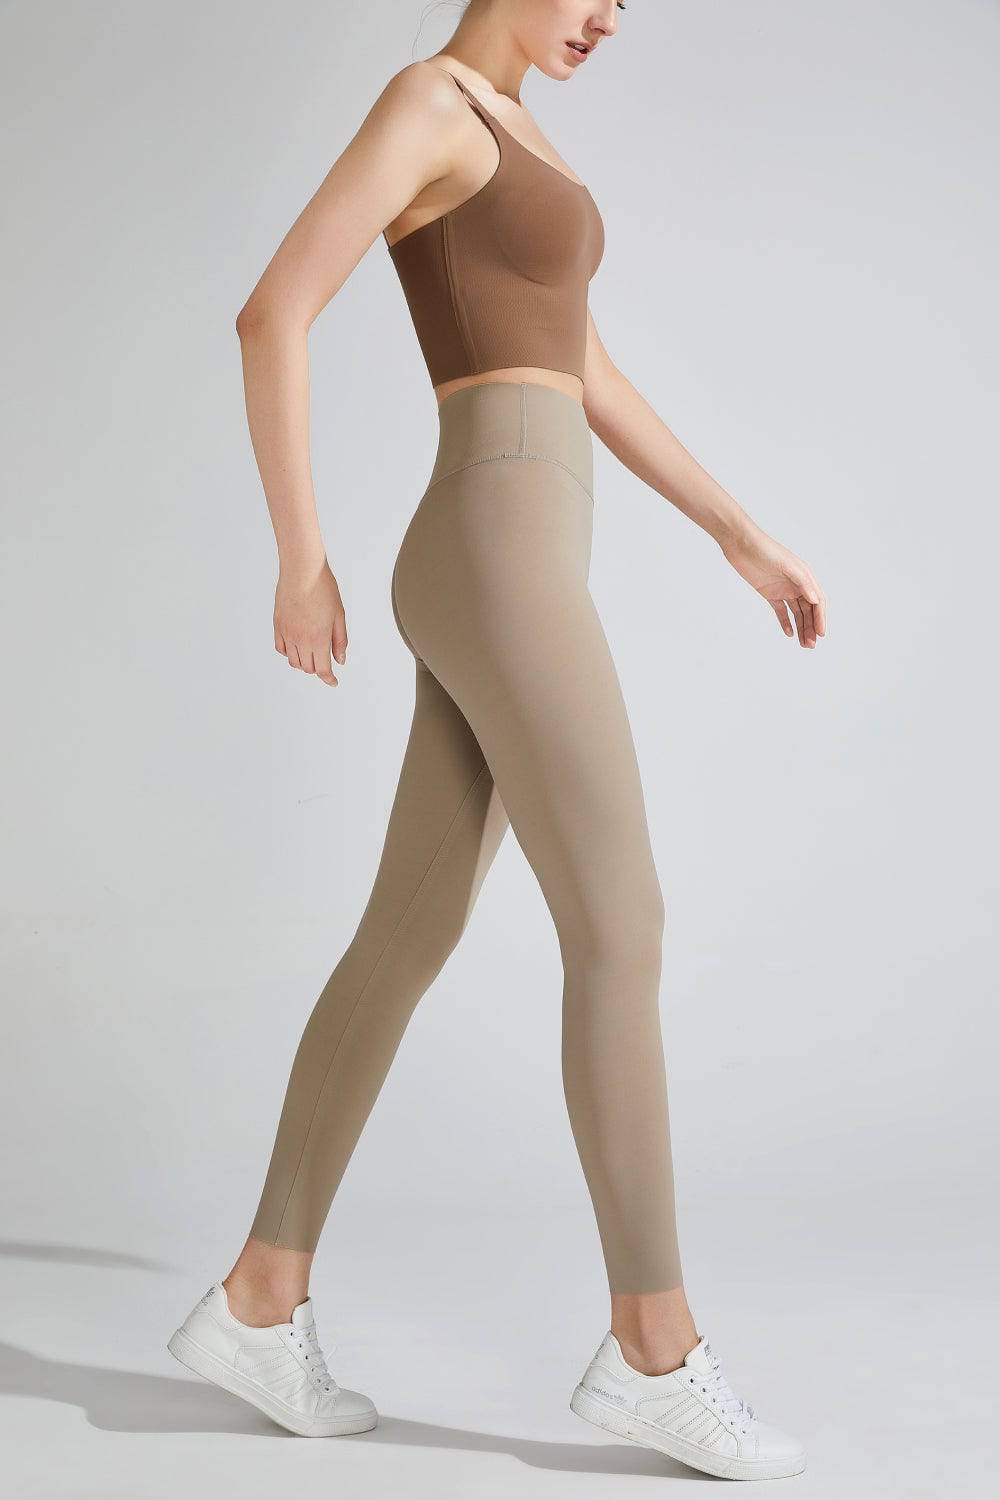 "Enchanting Movement - Embrace Your Inner Beauty with High Waist Breathable Sports Leggings, a Second Skin for Graceful Motion." - Guy Christopher